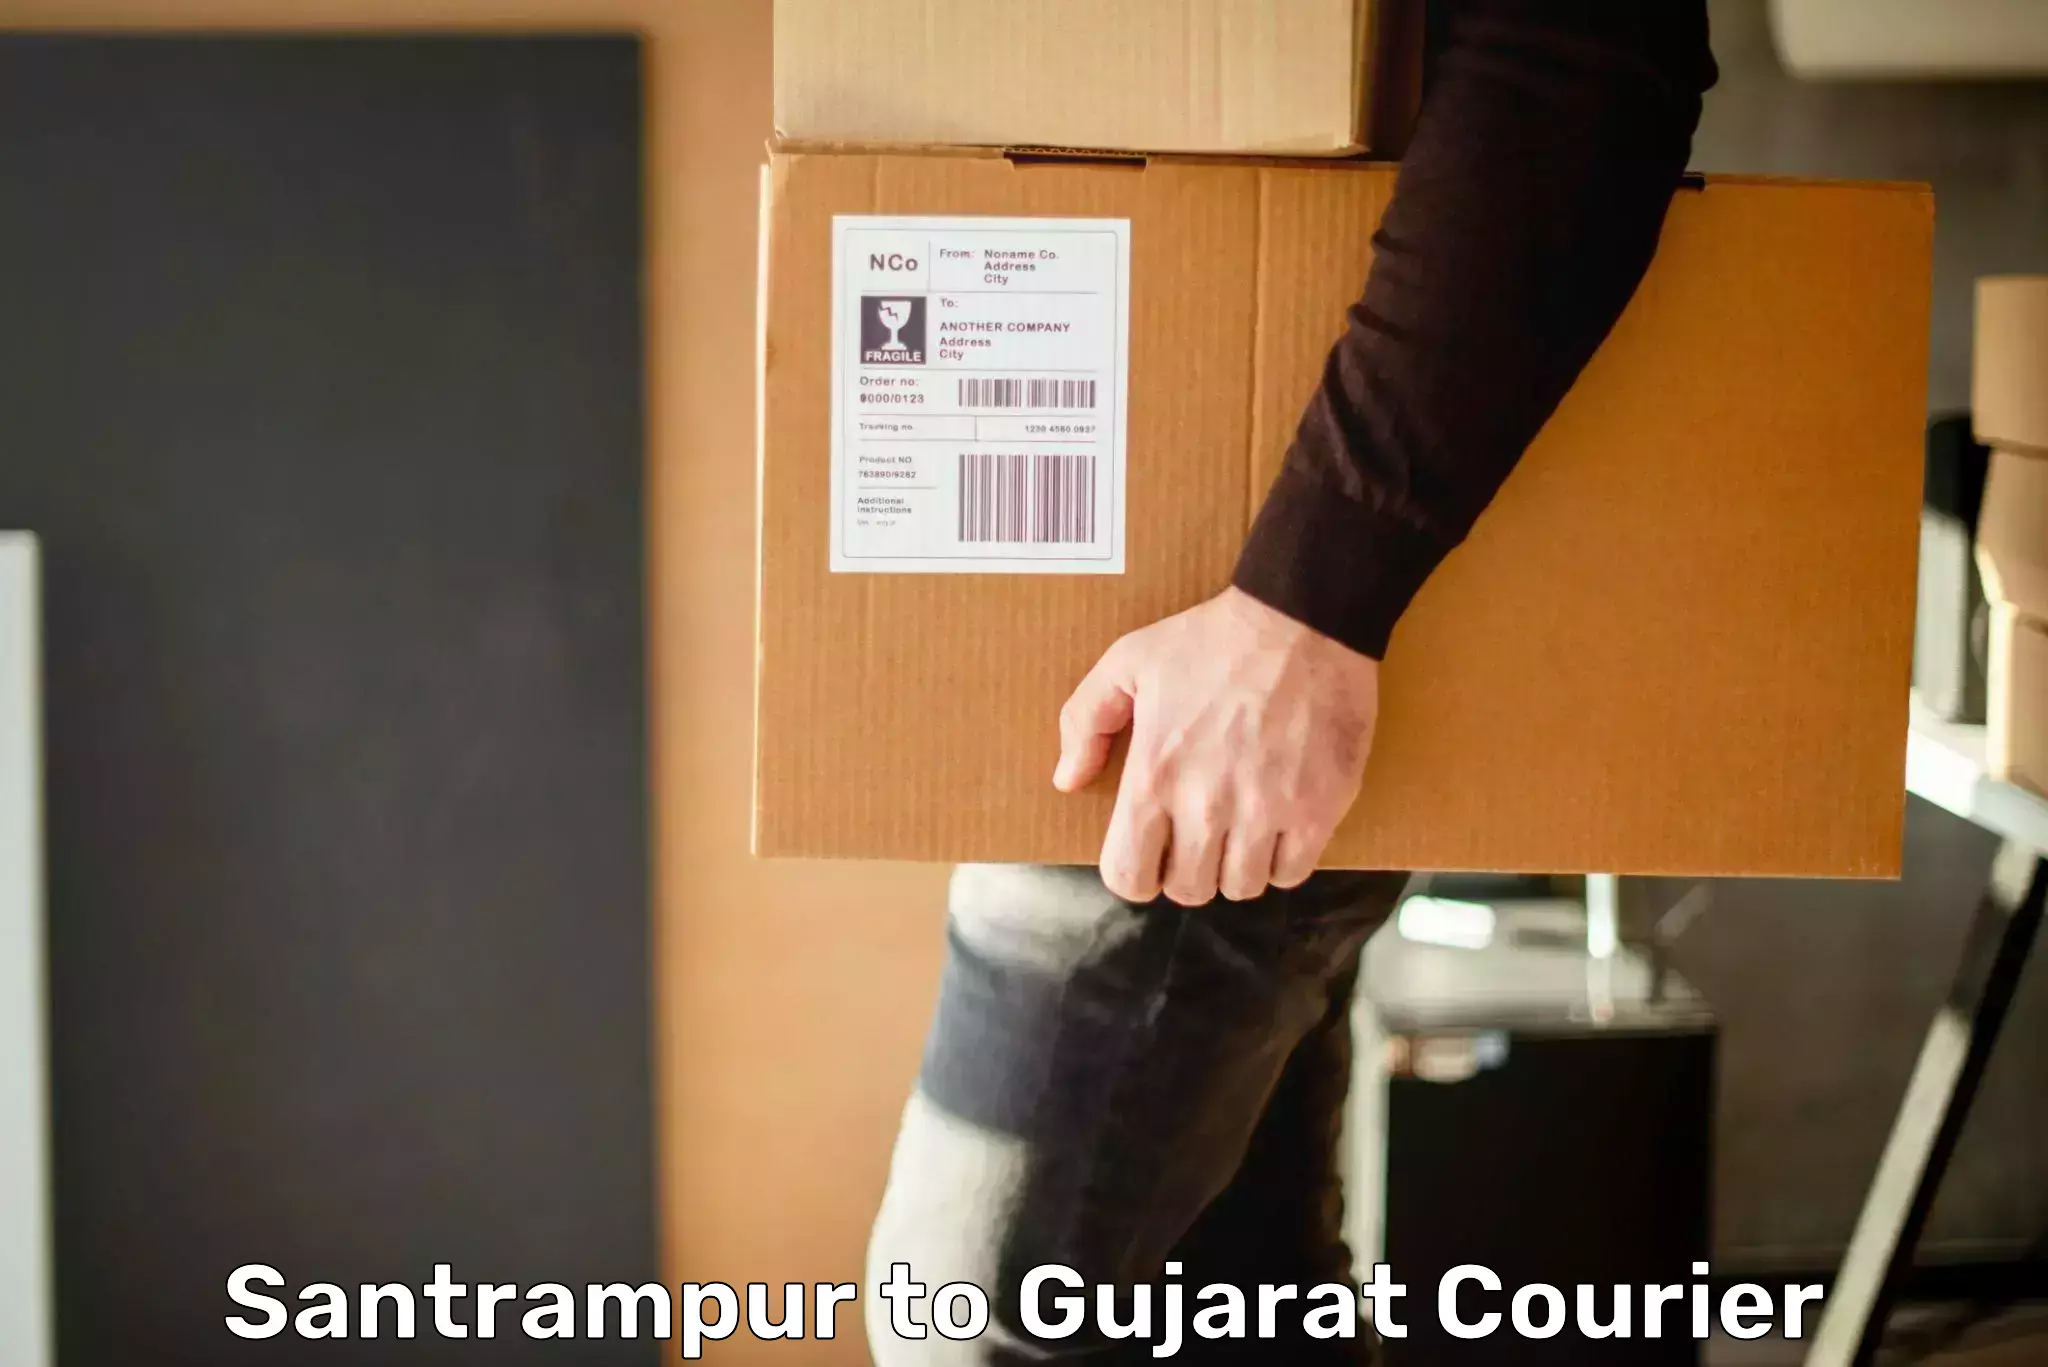 Fast shipping solutions Santrampur to Rajkot